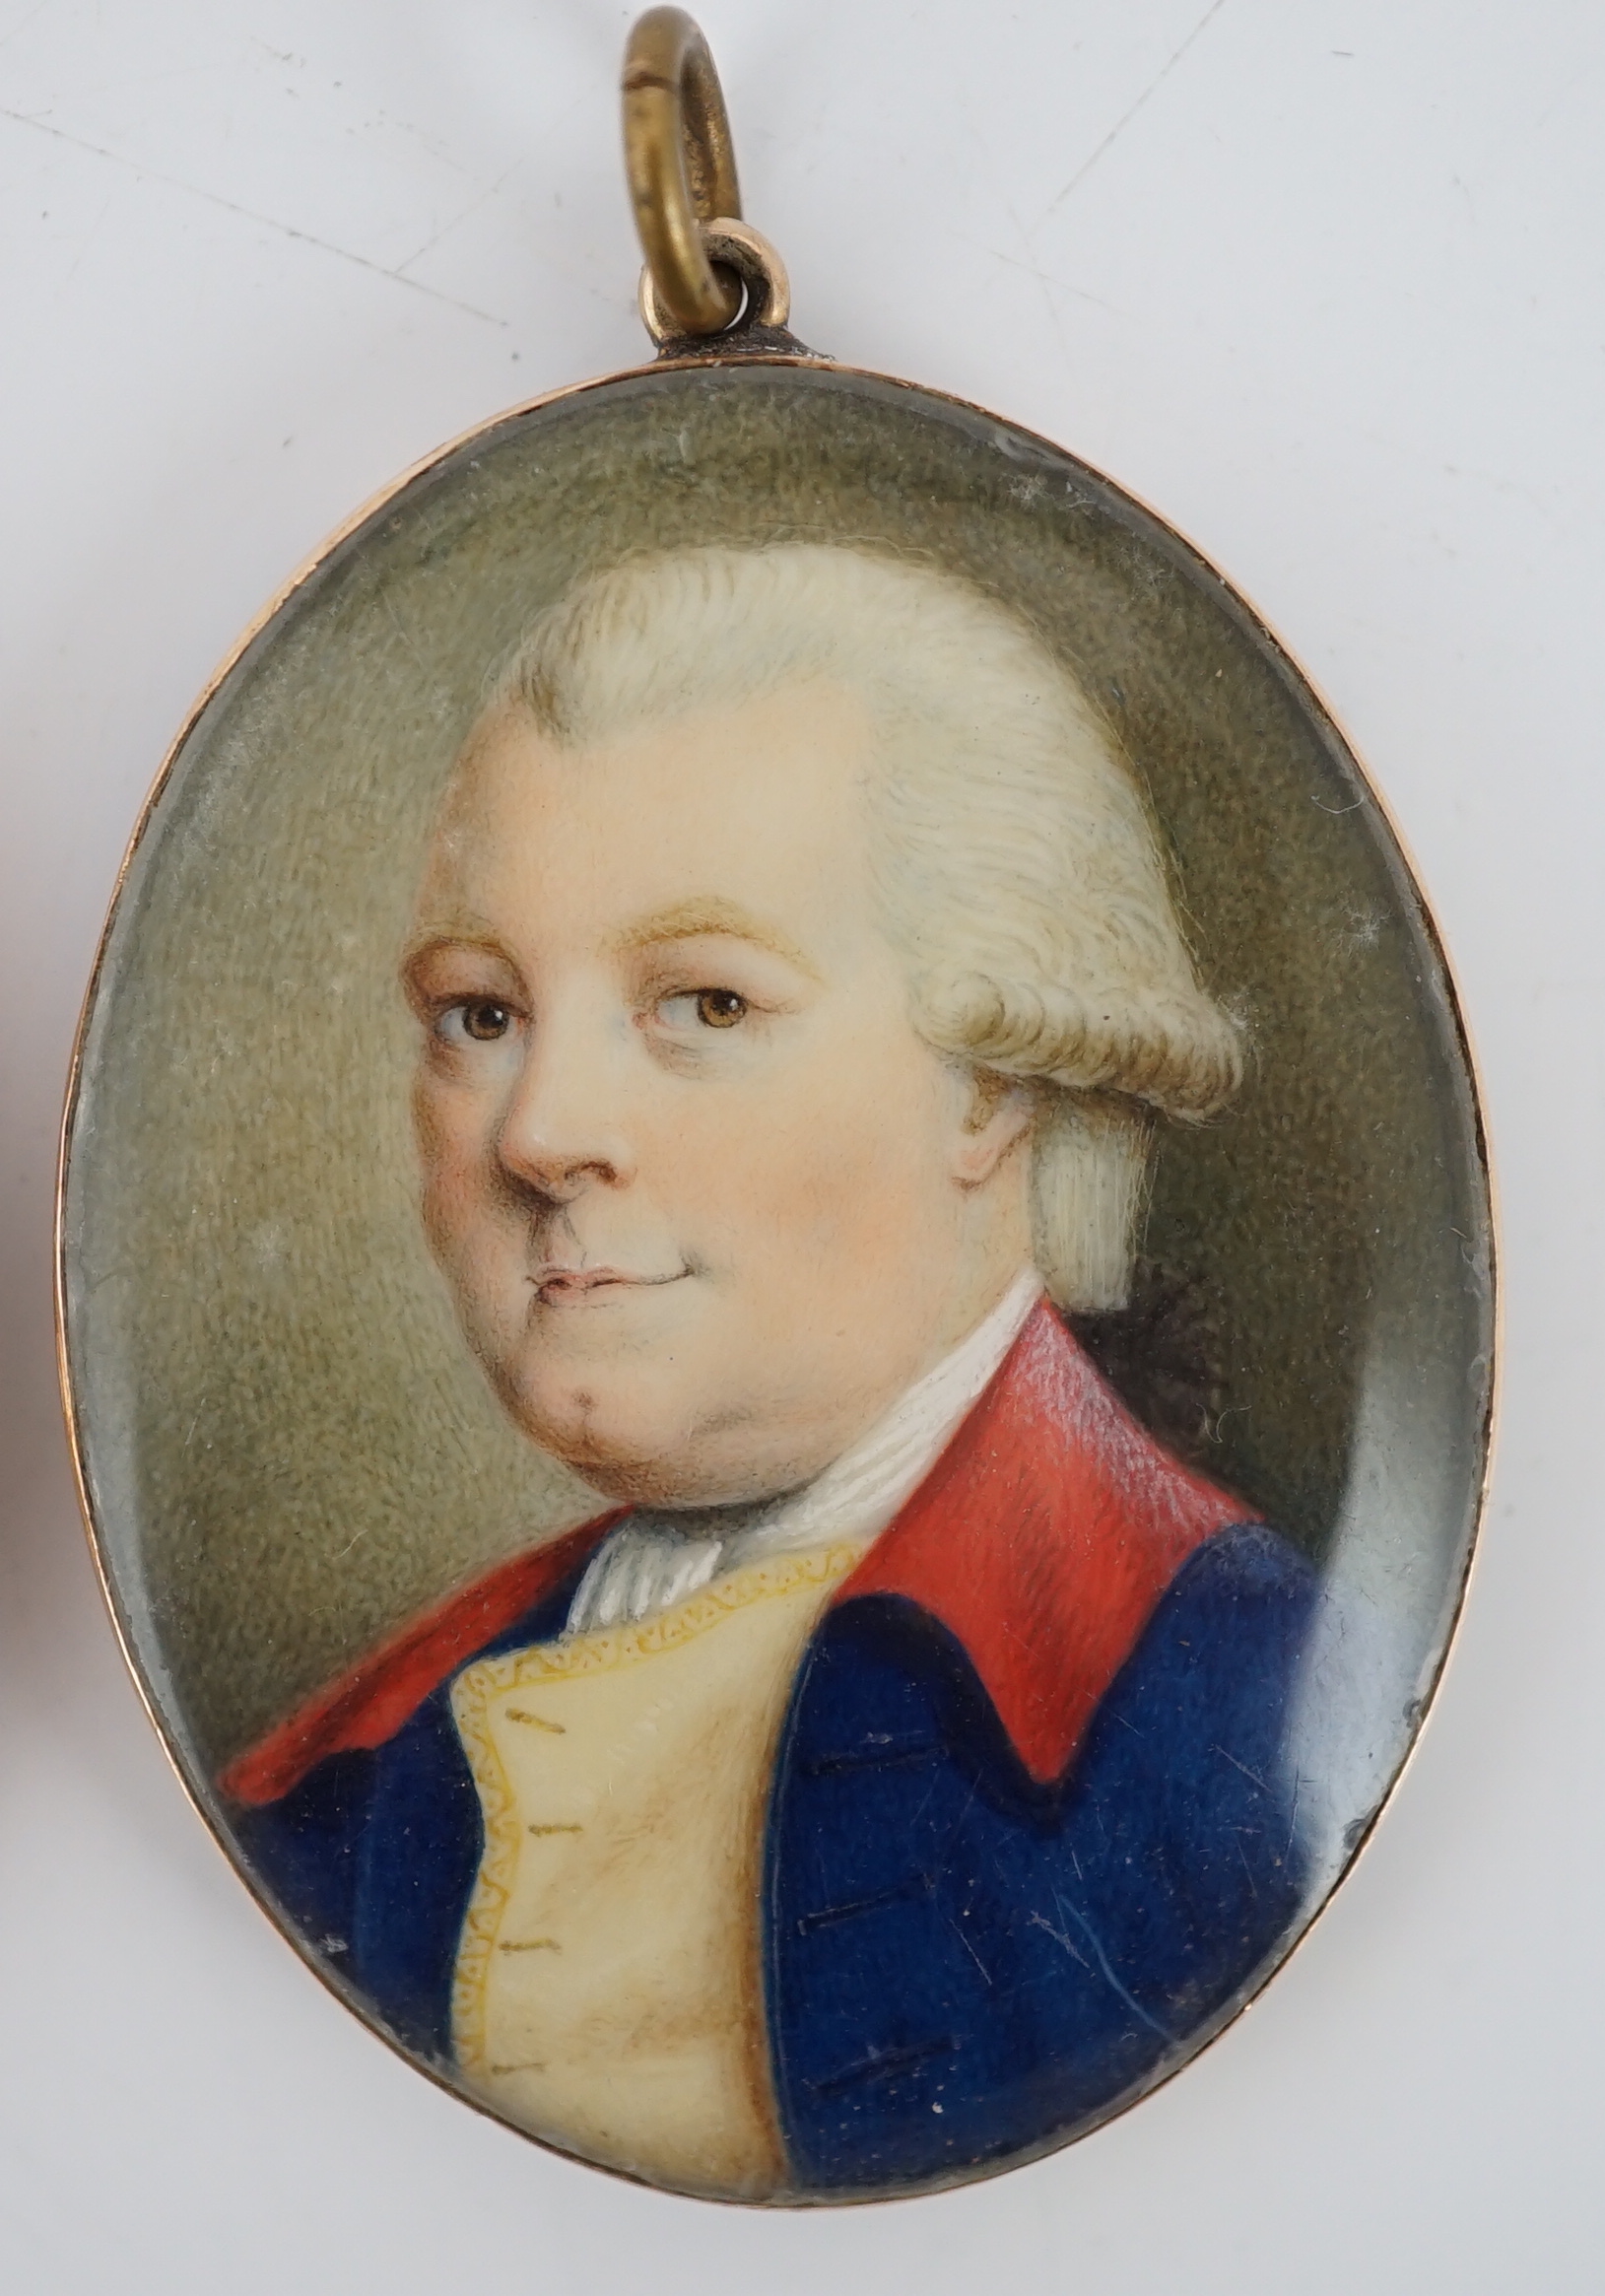 English School circa 1790, Portrait miniatures of an Army Officer and his wife (a pair), probably David Jenkinson and his wife, oil on ivory, 4 x 3cm. CITES Submission reference RFT2468C